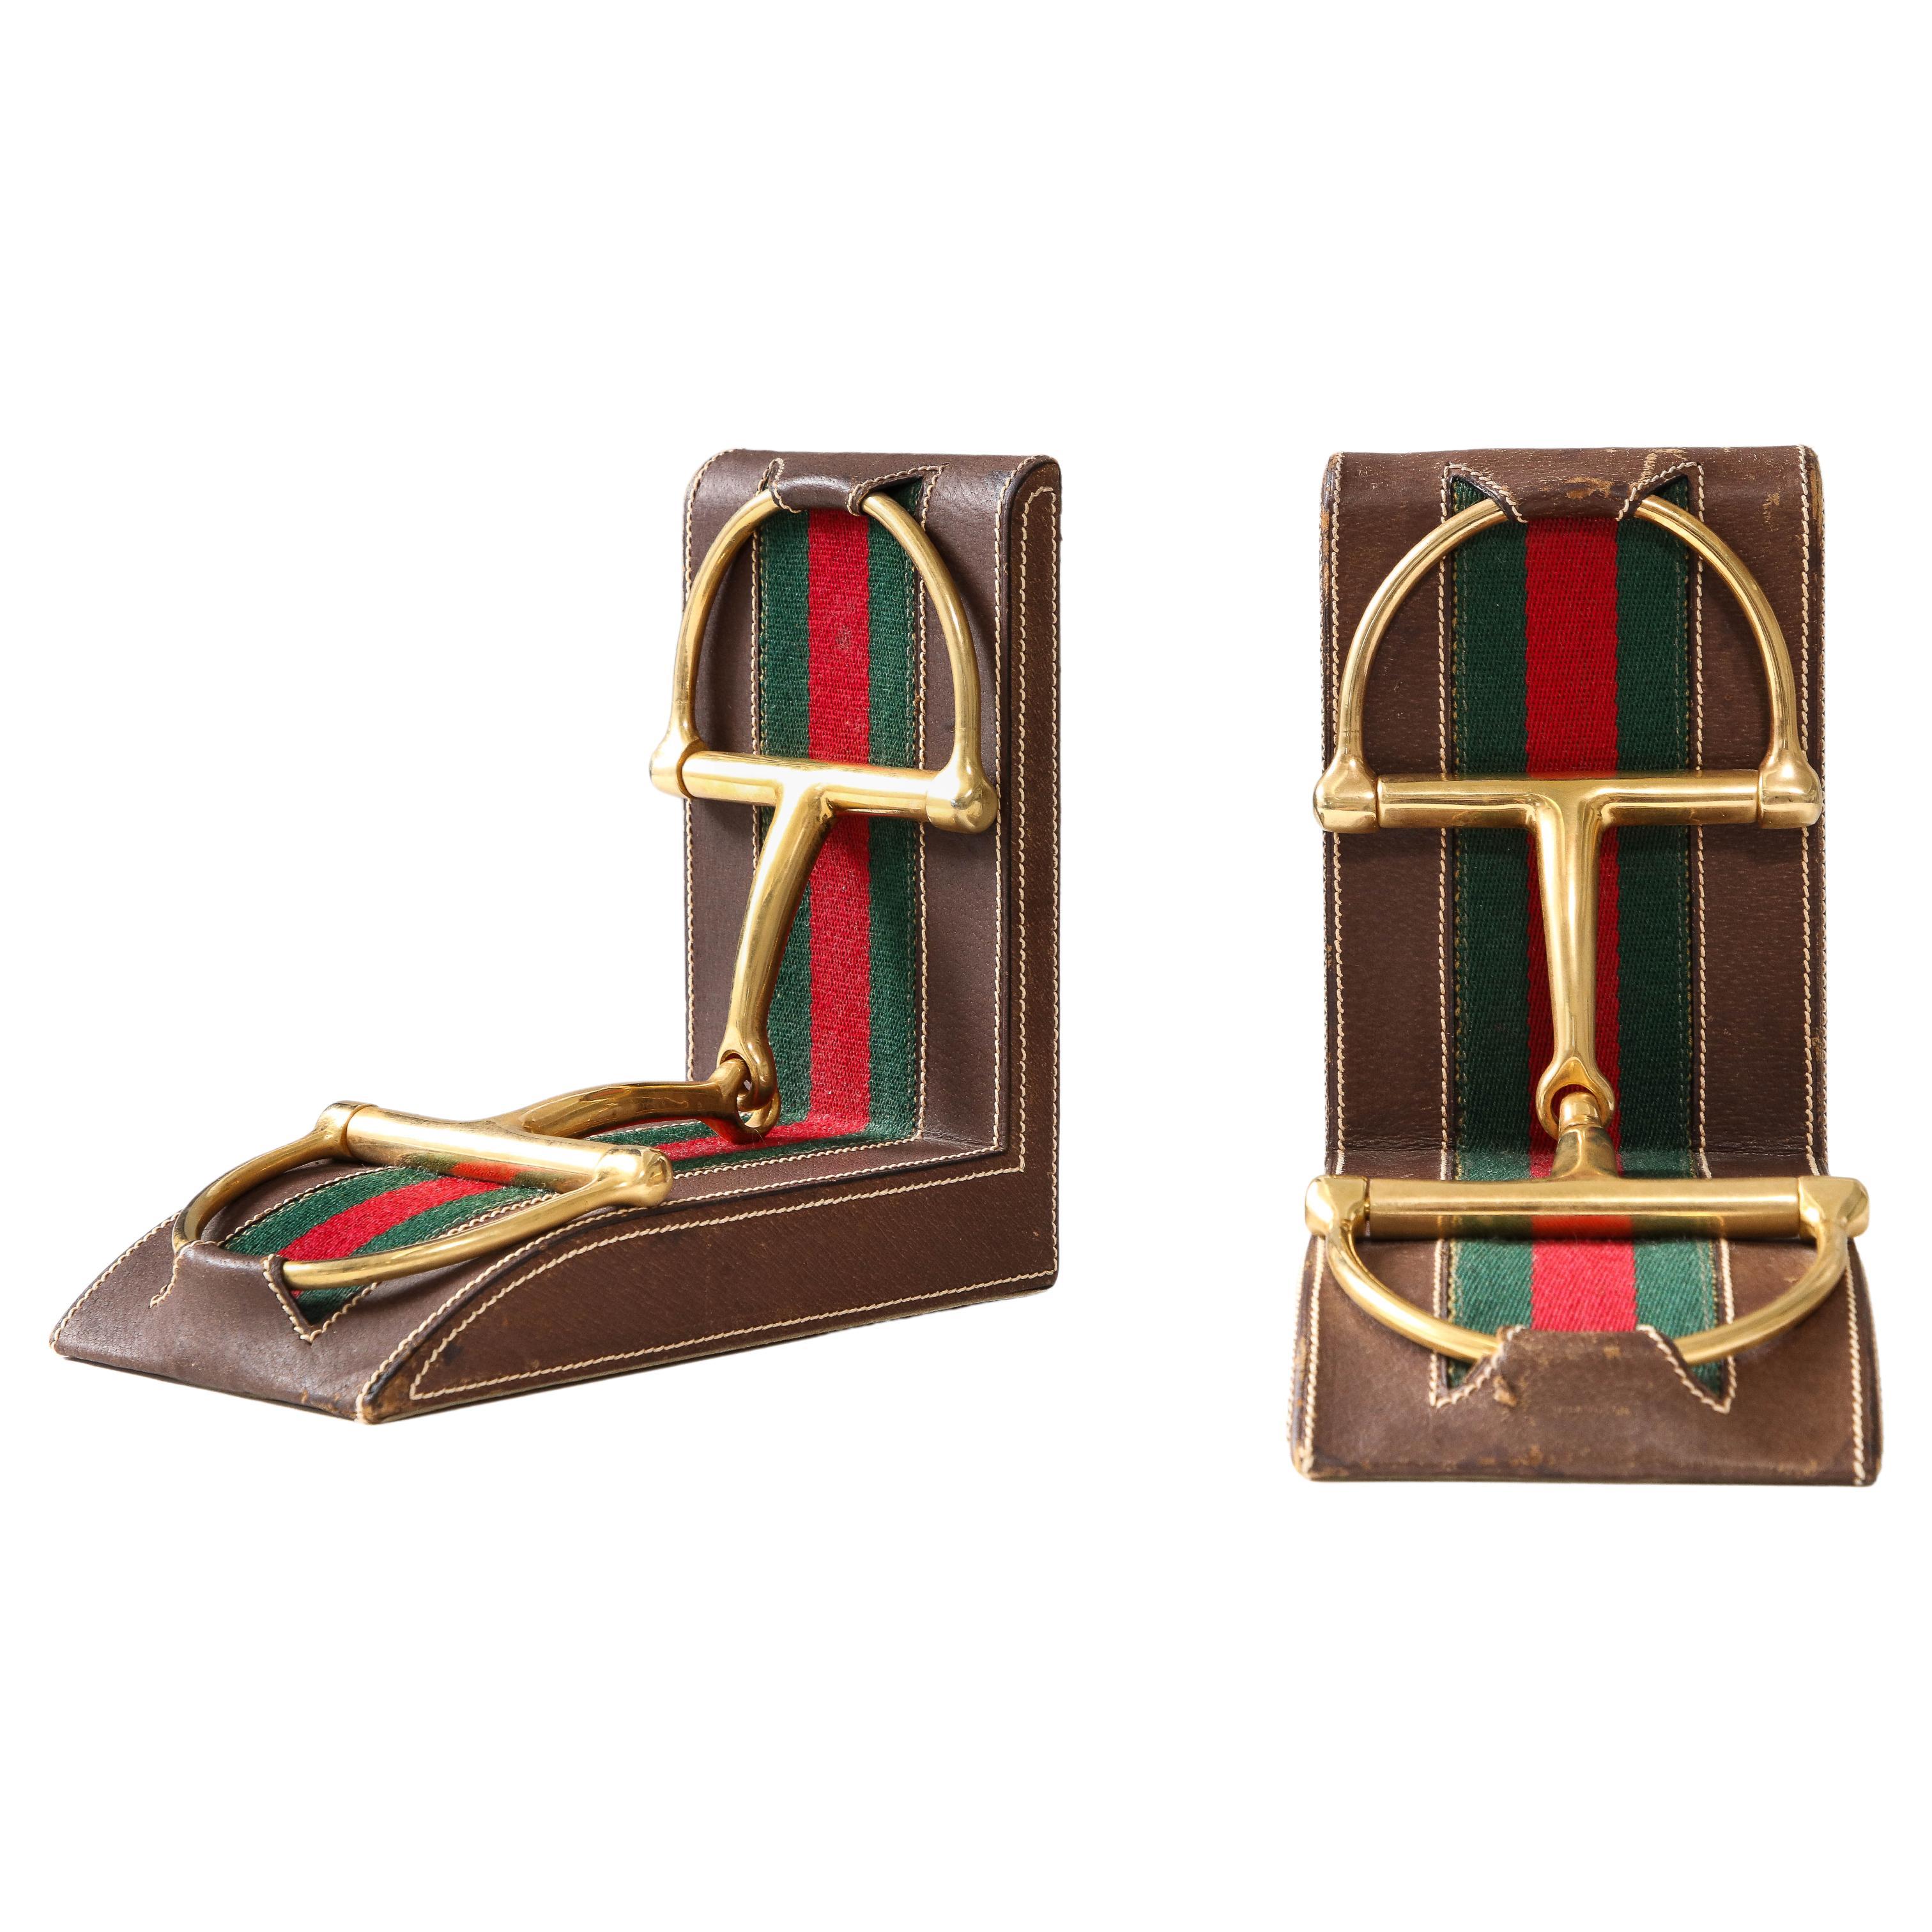 Pair of Leather and Brass Bookends, Gucci, Italy, c. 1970 For Sale